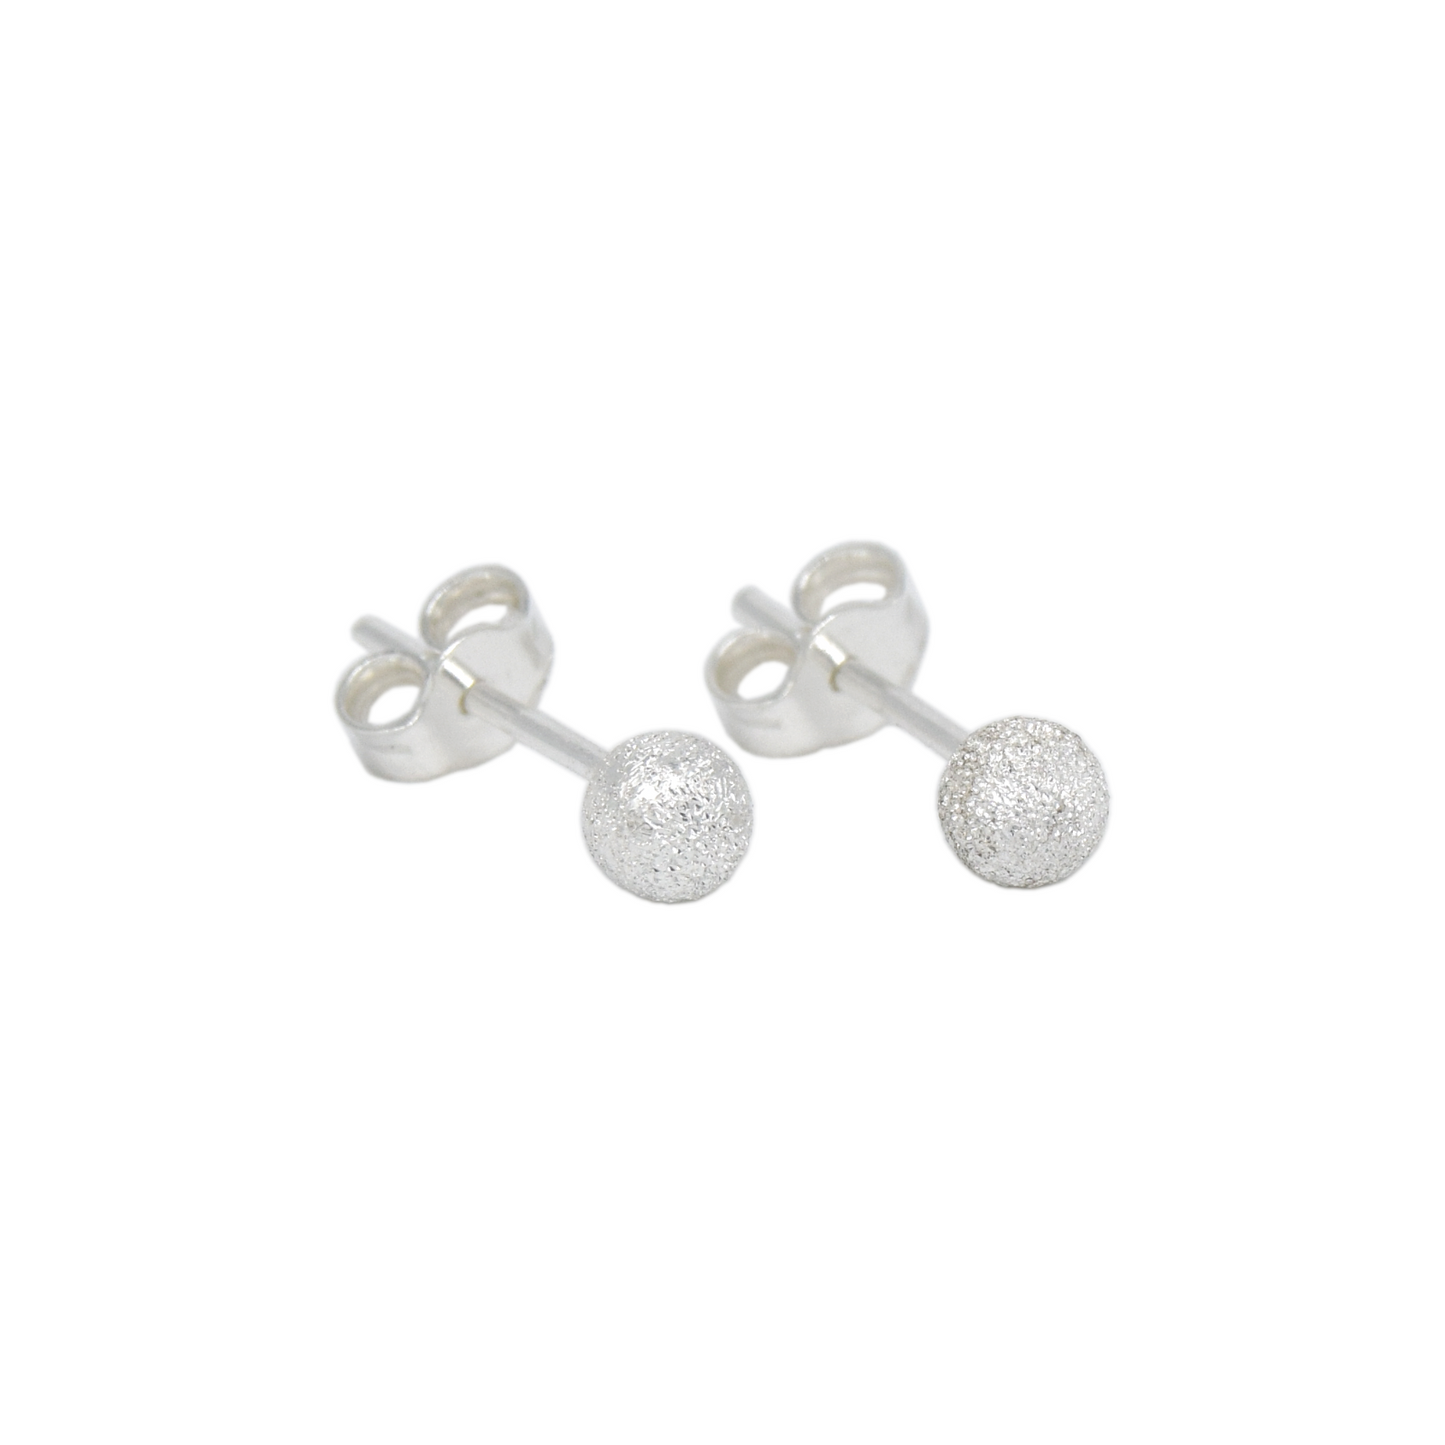 Genuine 925 Sterling Silver 4mm Frosted Ball Studs/Earrings In a Gift Box